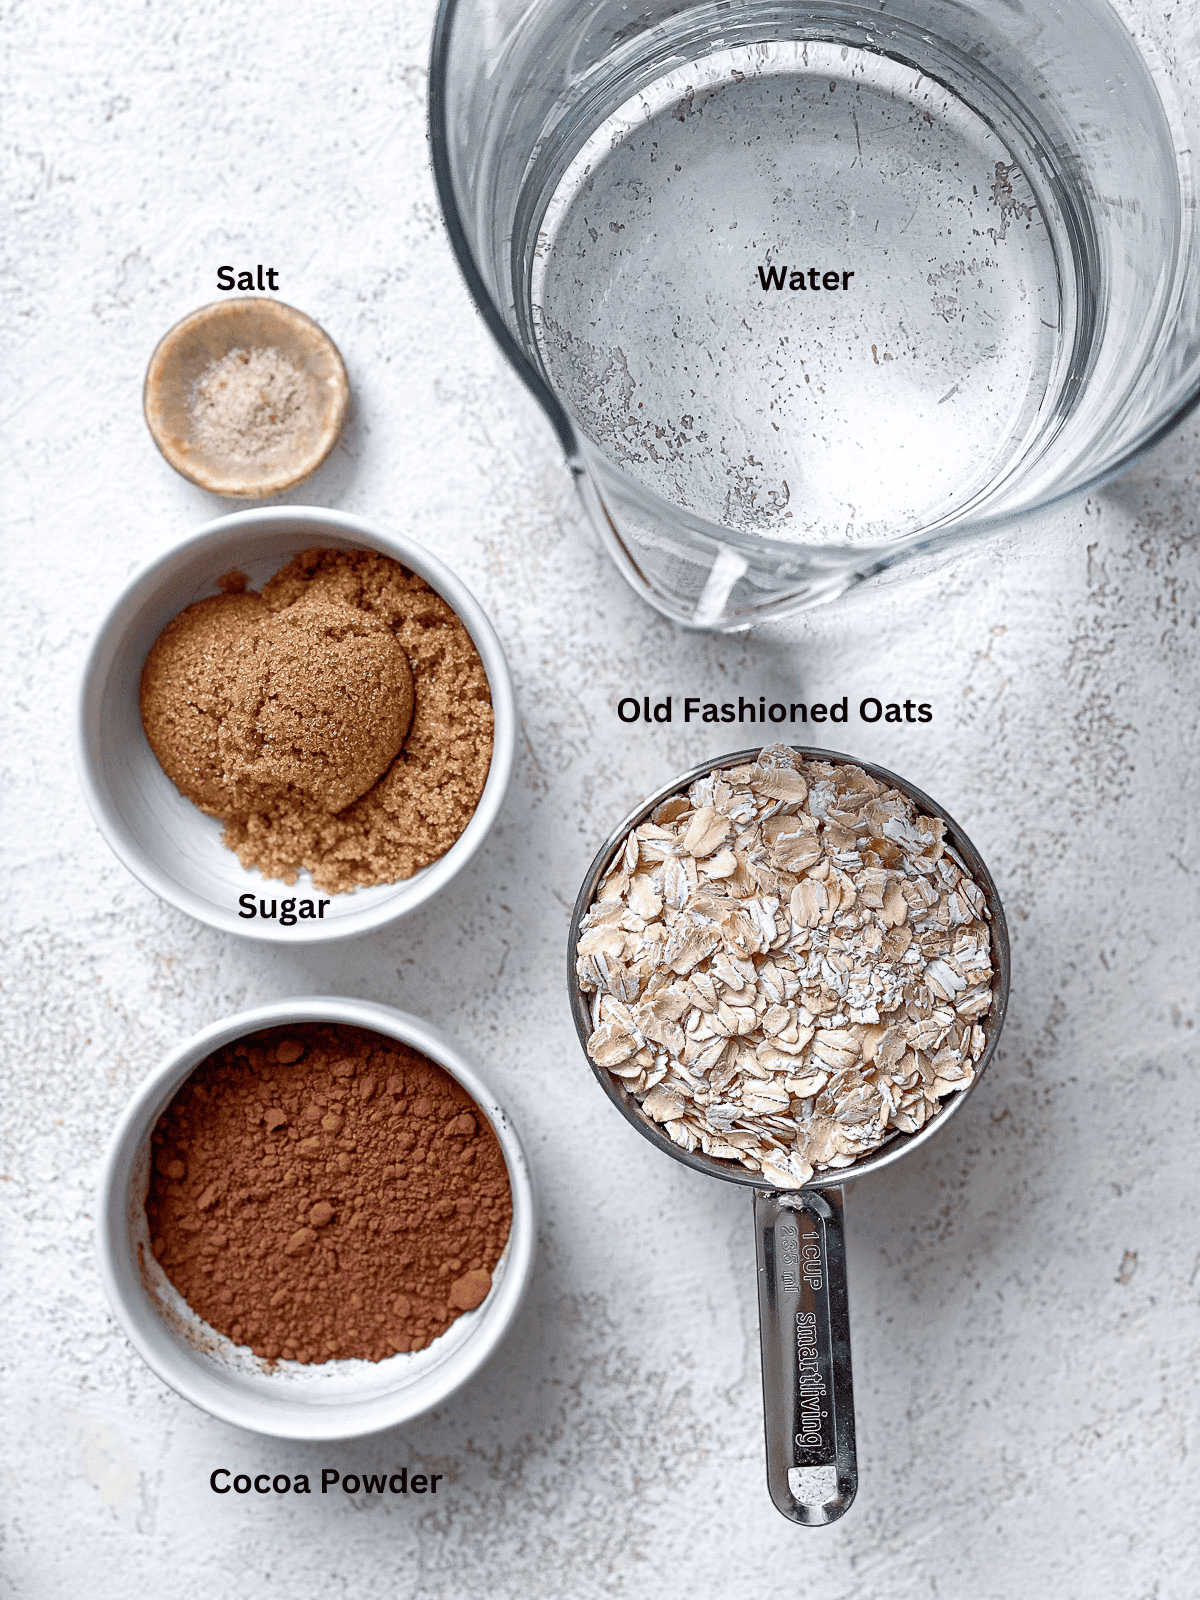 ingredients for Chocolate Oat Milk on a white surface